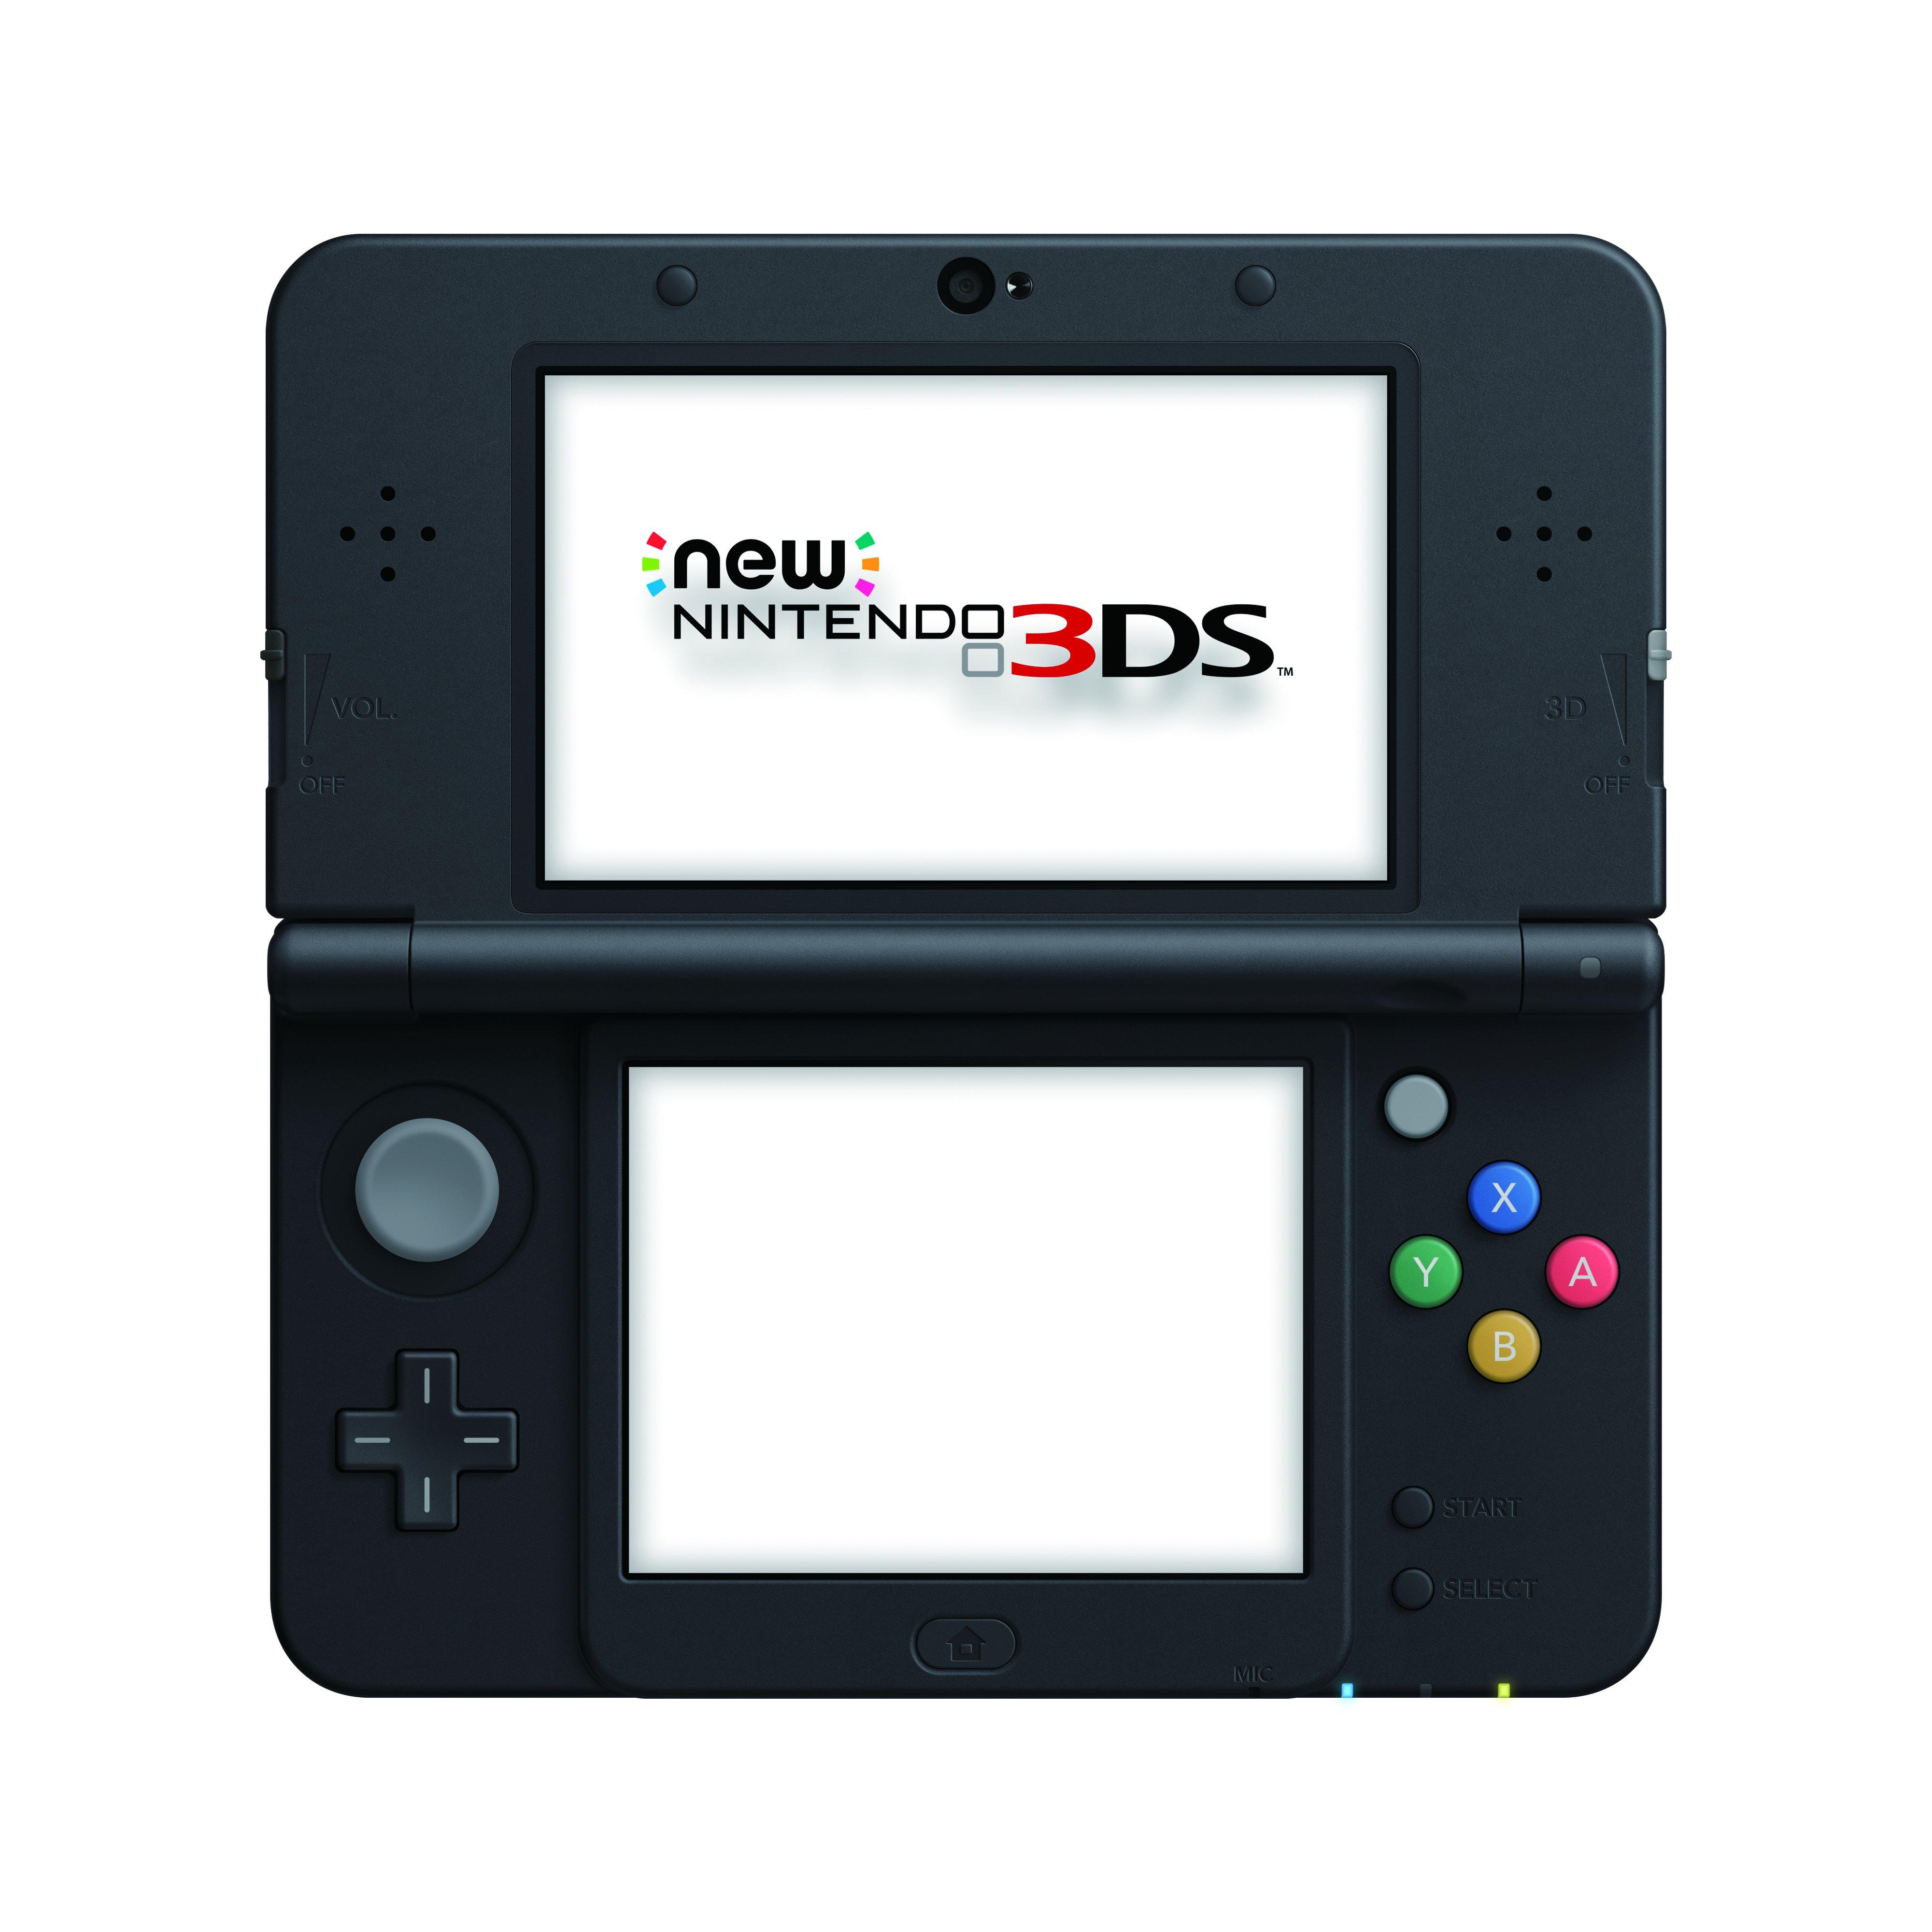 How much does a pre owned 3ds cost at gamestop New Nintendo 3ds Super Mario Black Nintendo 3ds Gamestop